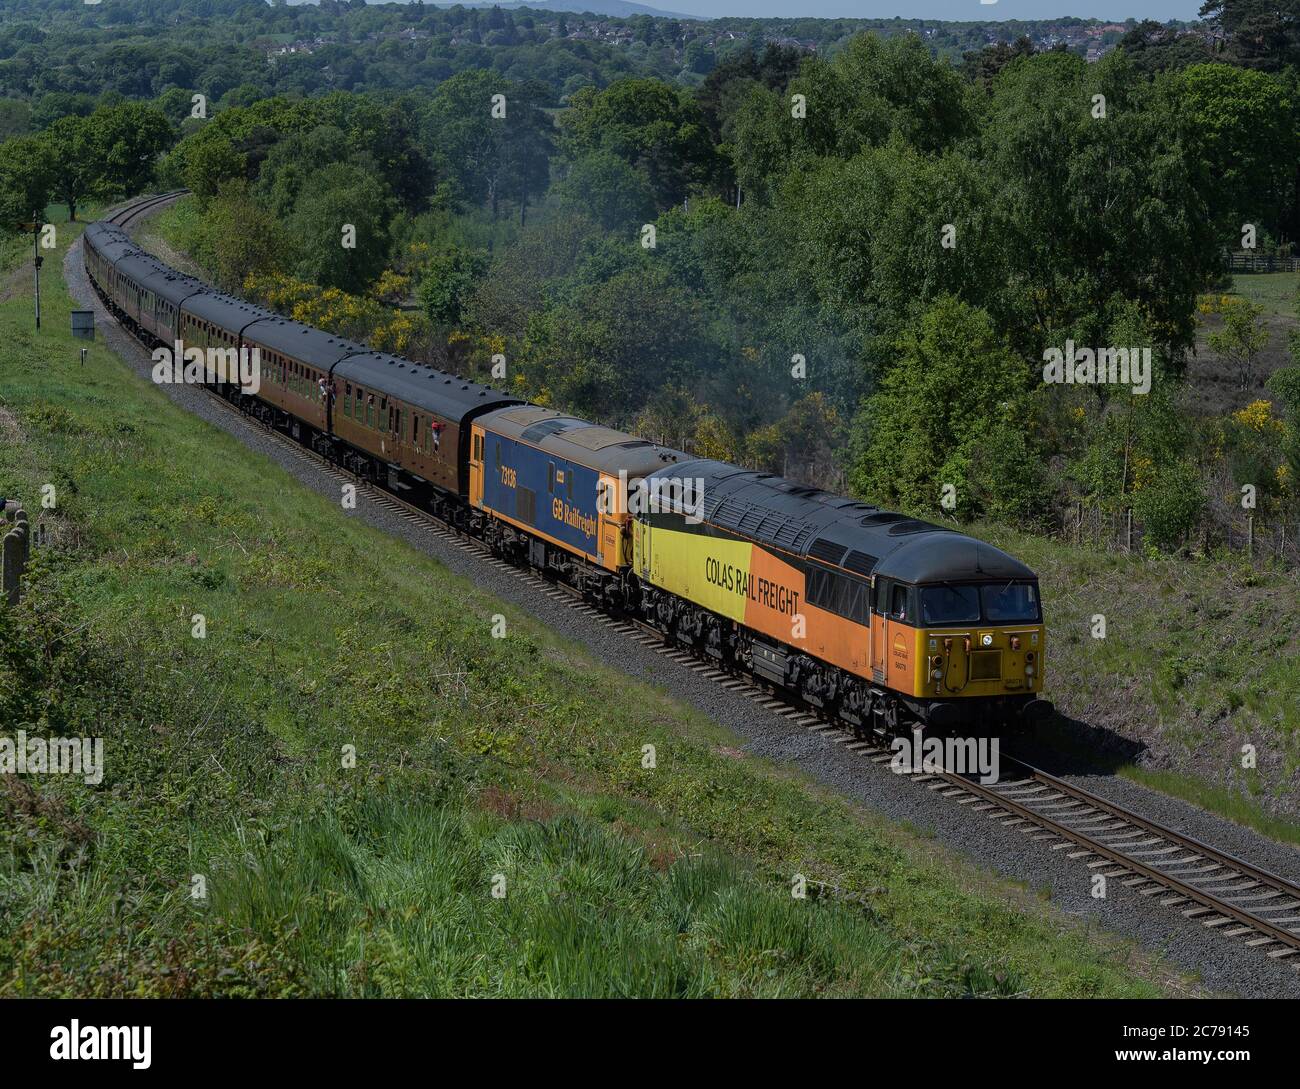 56078 & 73136 taking part in the 2018 Severn Valley Railway Diesel Gala Stock Photo